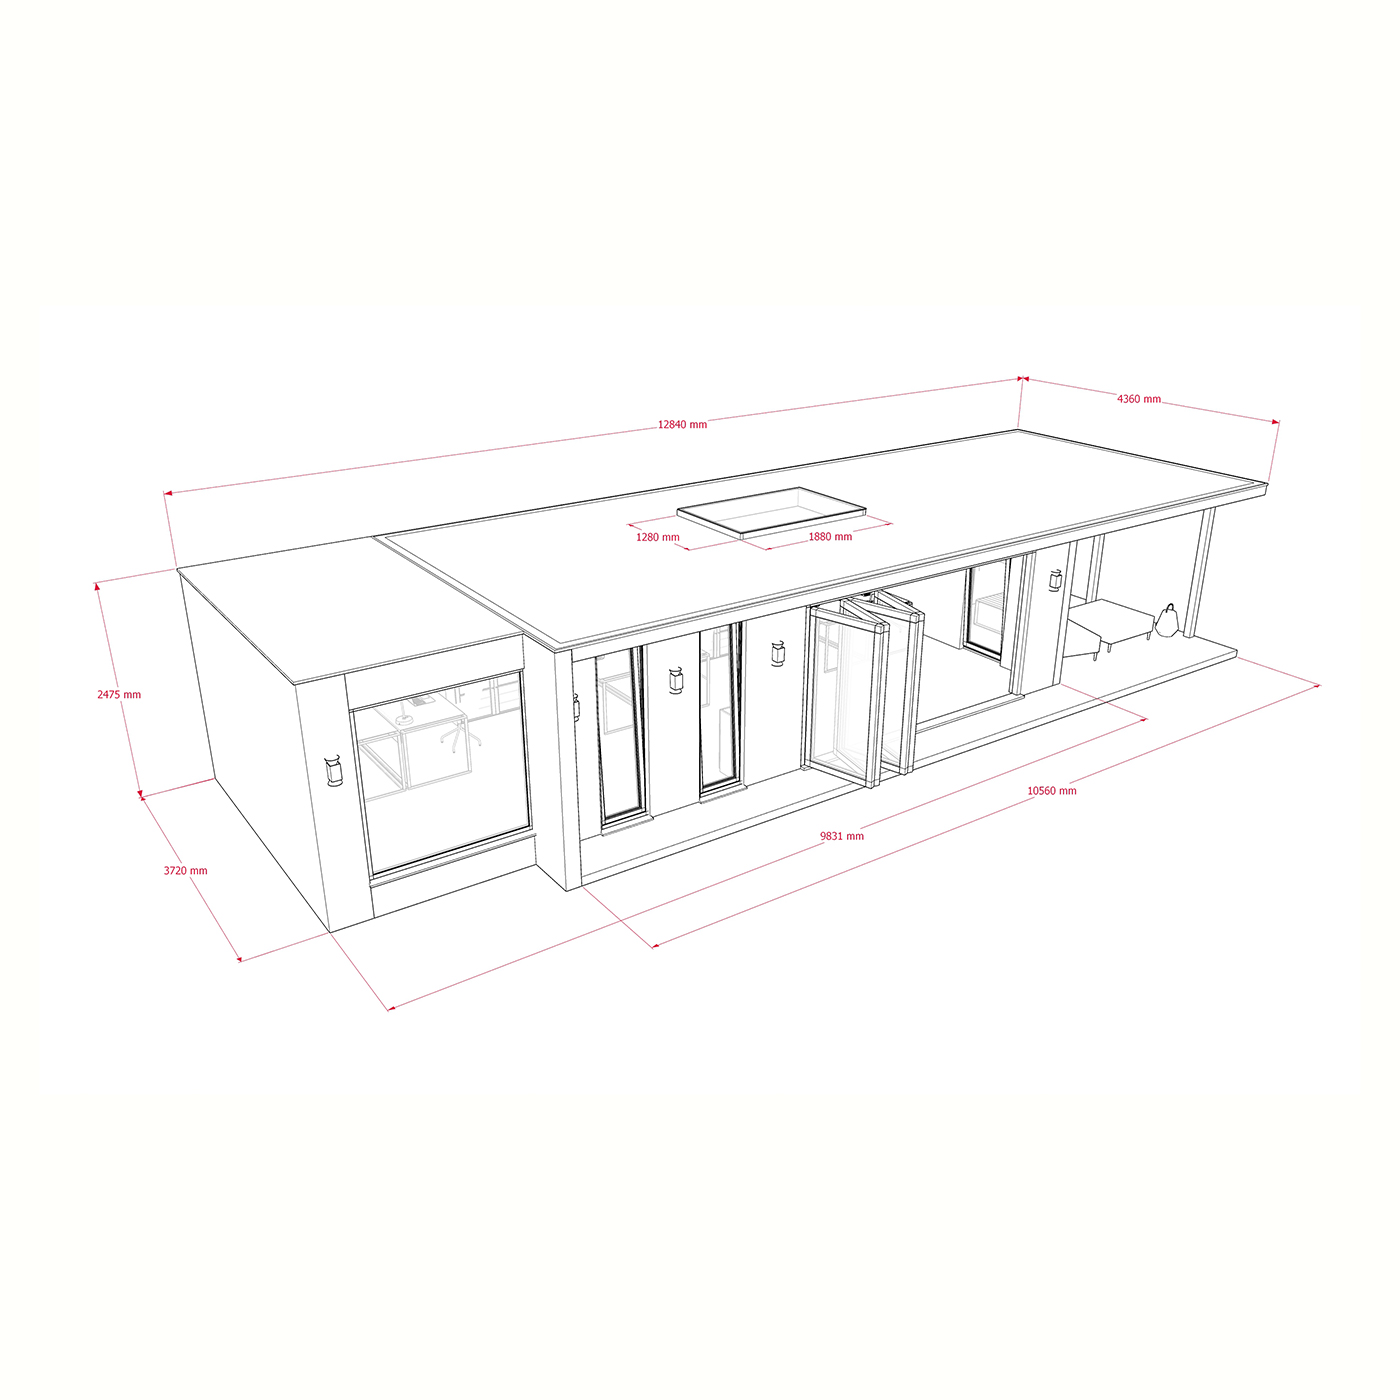 Exterior dimensions for 3.6m by 9.6m garden room